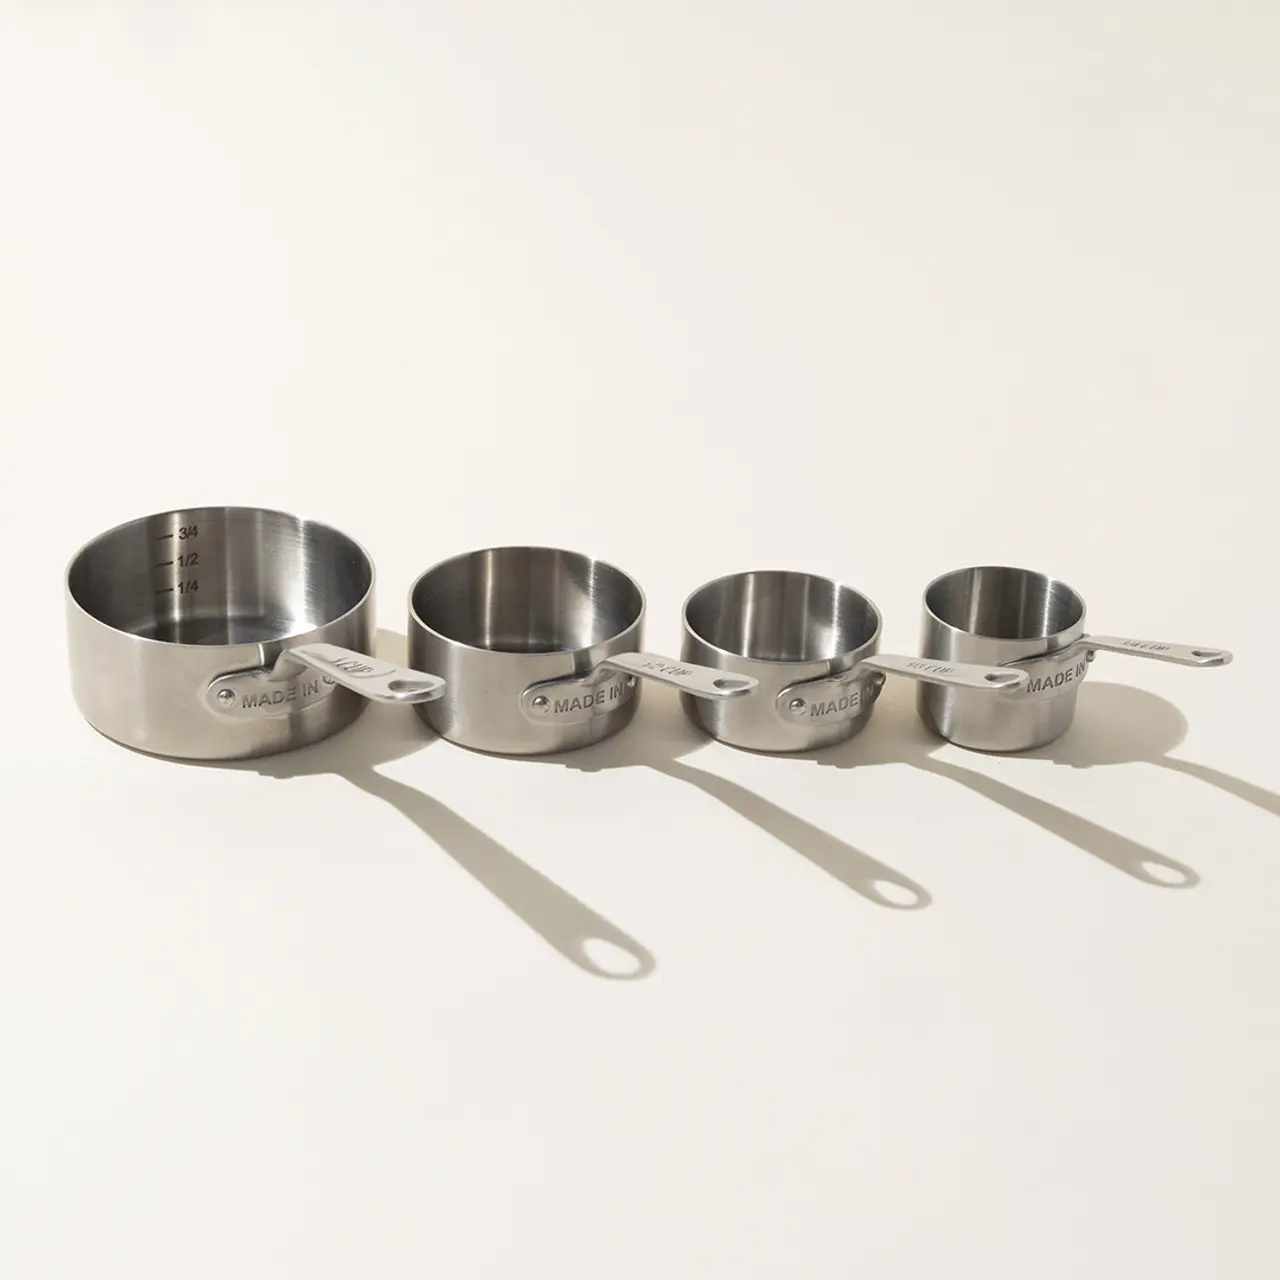 Four graduated stainless steel measuring cups are aligned in a row, decreasing in size from left to right, casting slight shadows on a bright surface.